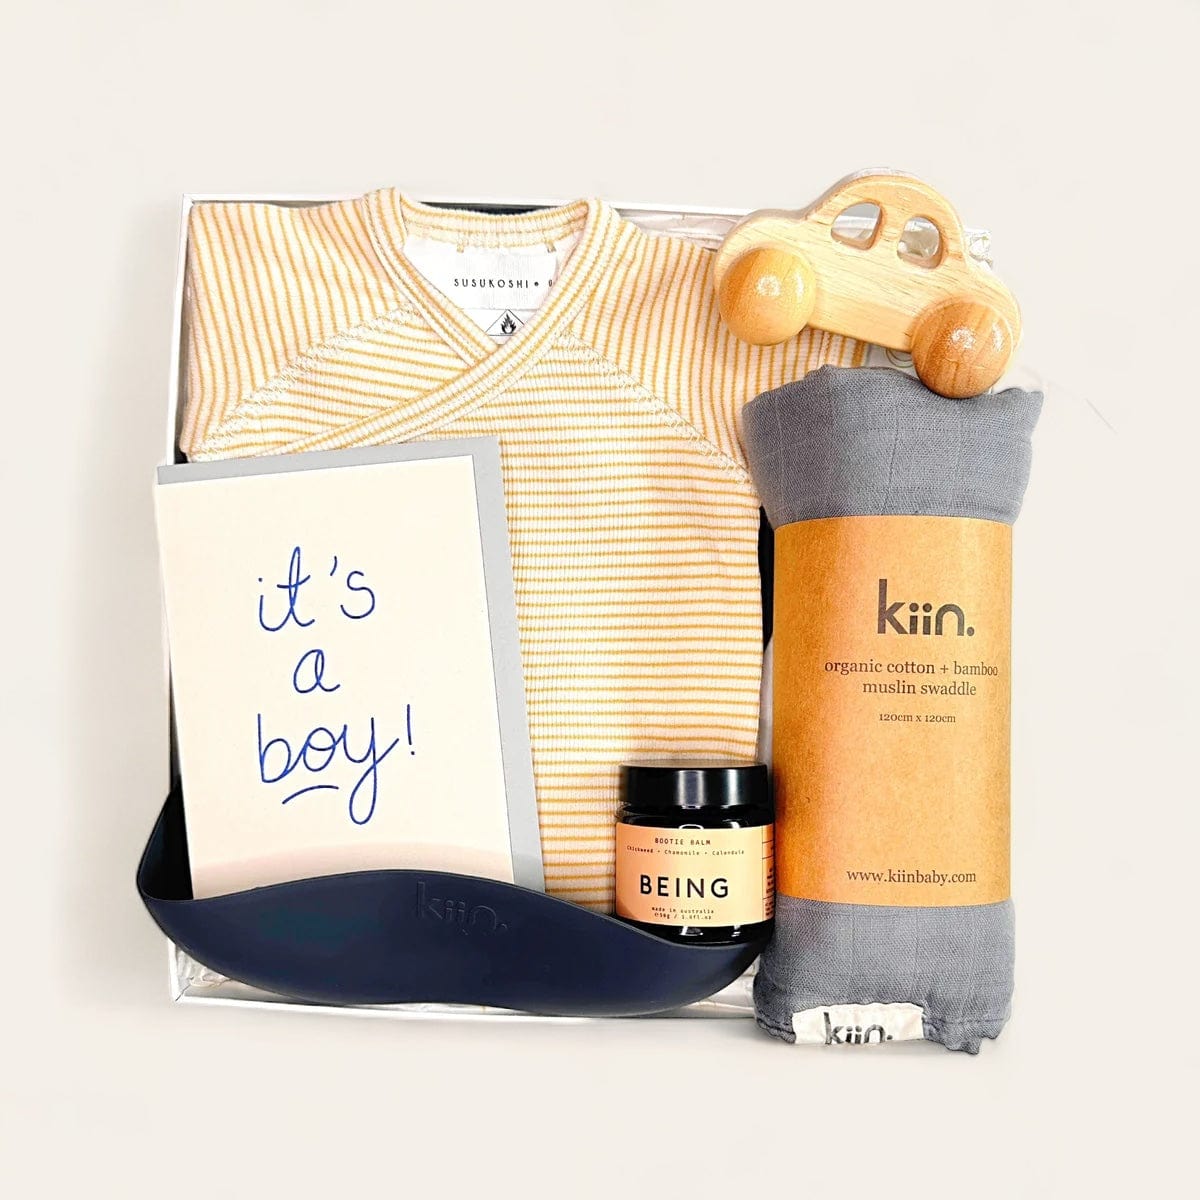 It's A Boy - Gift Box for Baby by Claya